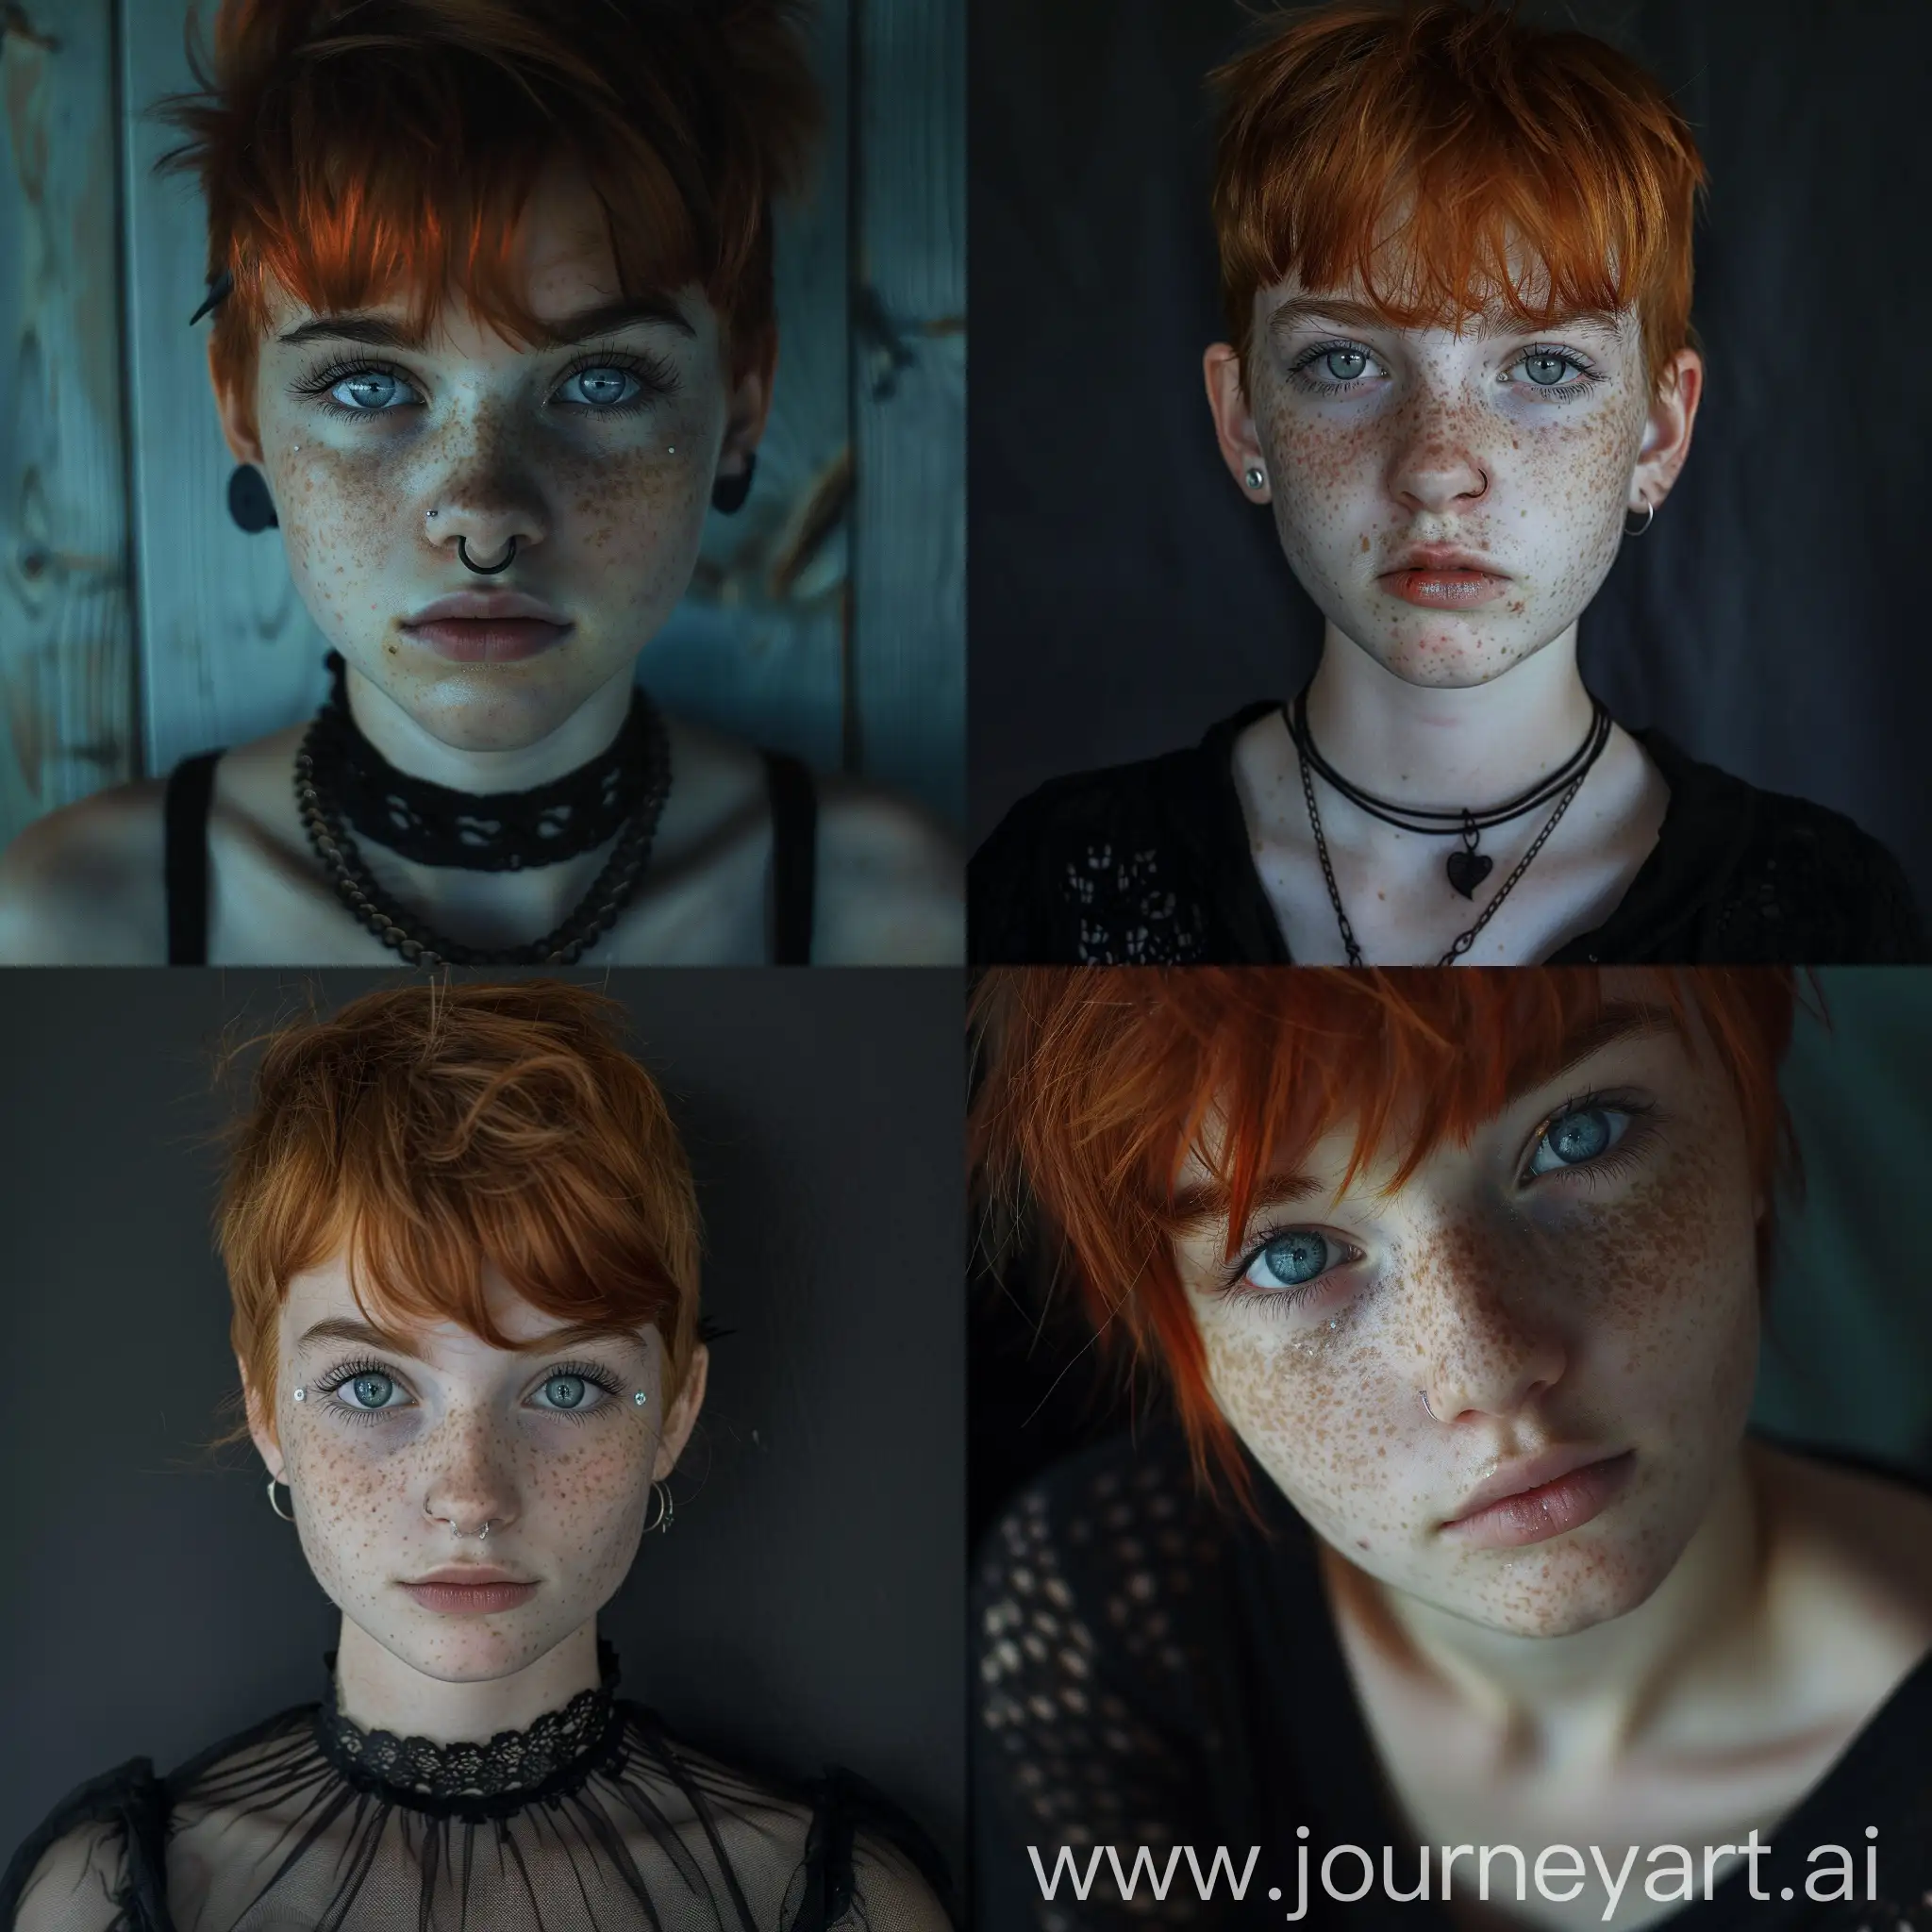 Gothic-RedHaired-Teen-with-Pixie-Cut-and-Freckles-in-Icy-Blue-Gaze